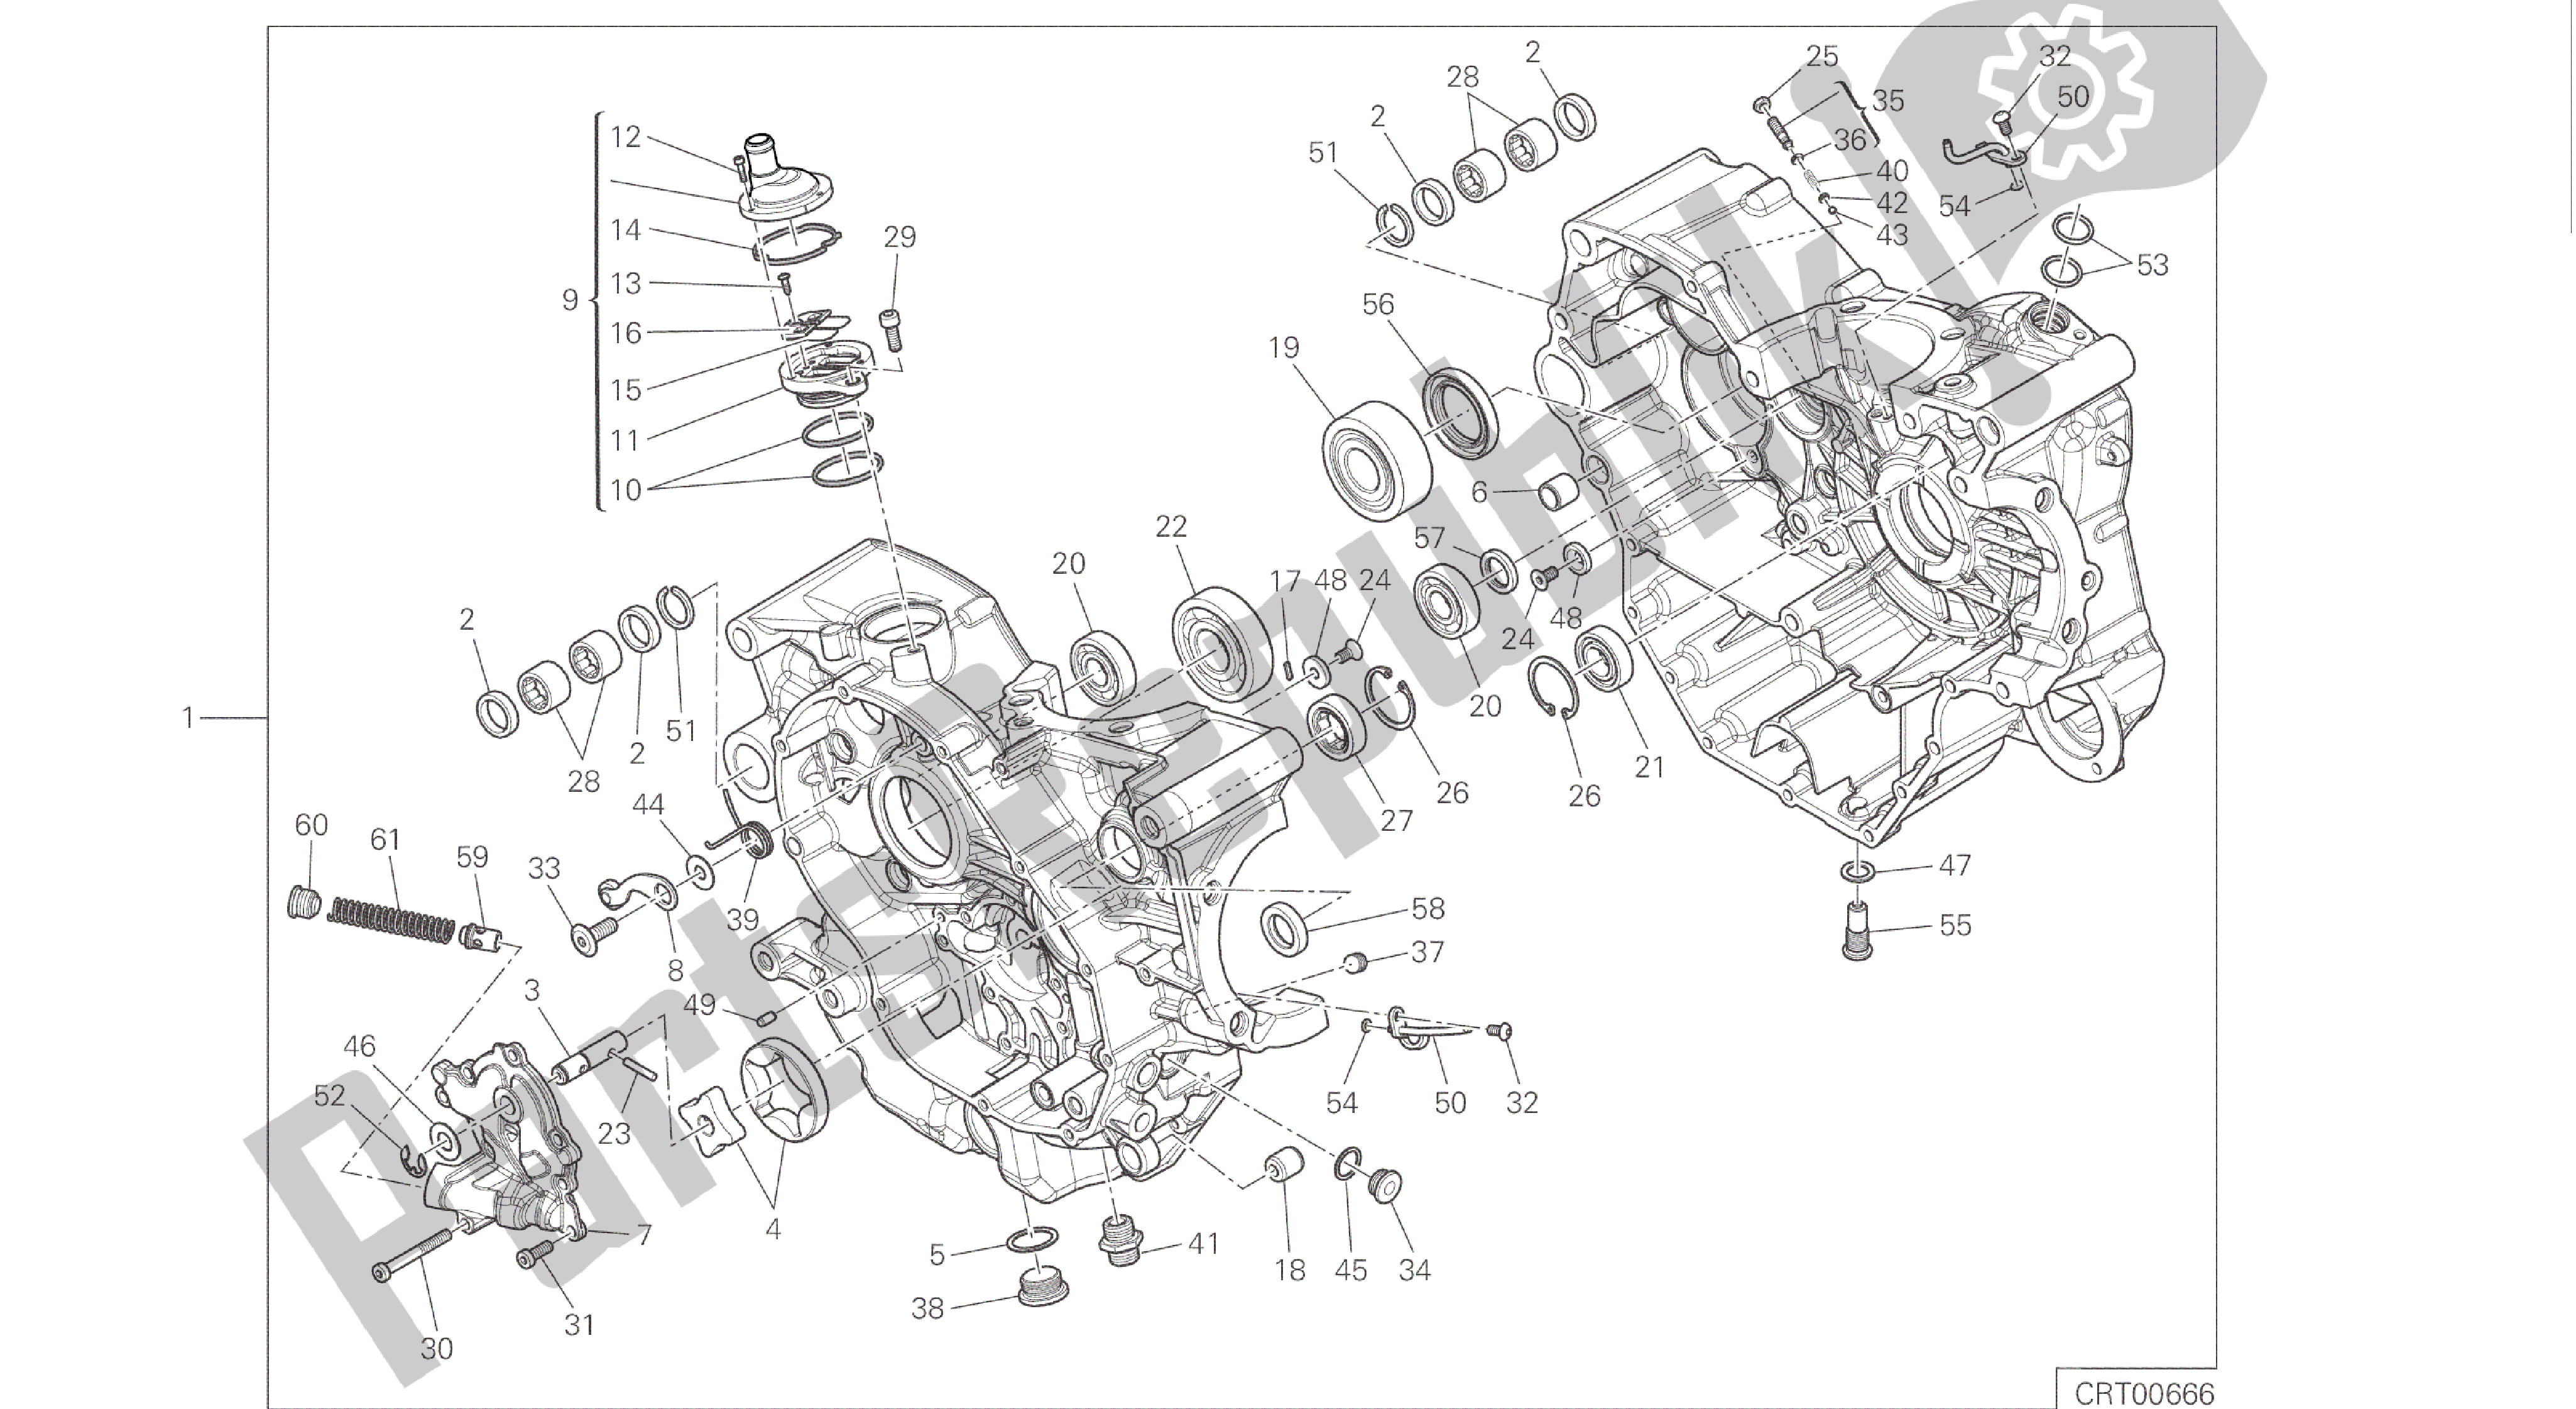 All parts for the Drawing 010 - Half-crankcases Pair [mod:hyp Str;xst:aus,eur,fra,jap,twn]group Engine of the Ducati Hypermotard 821 2015